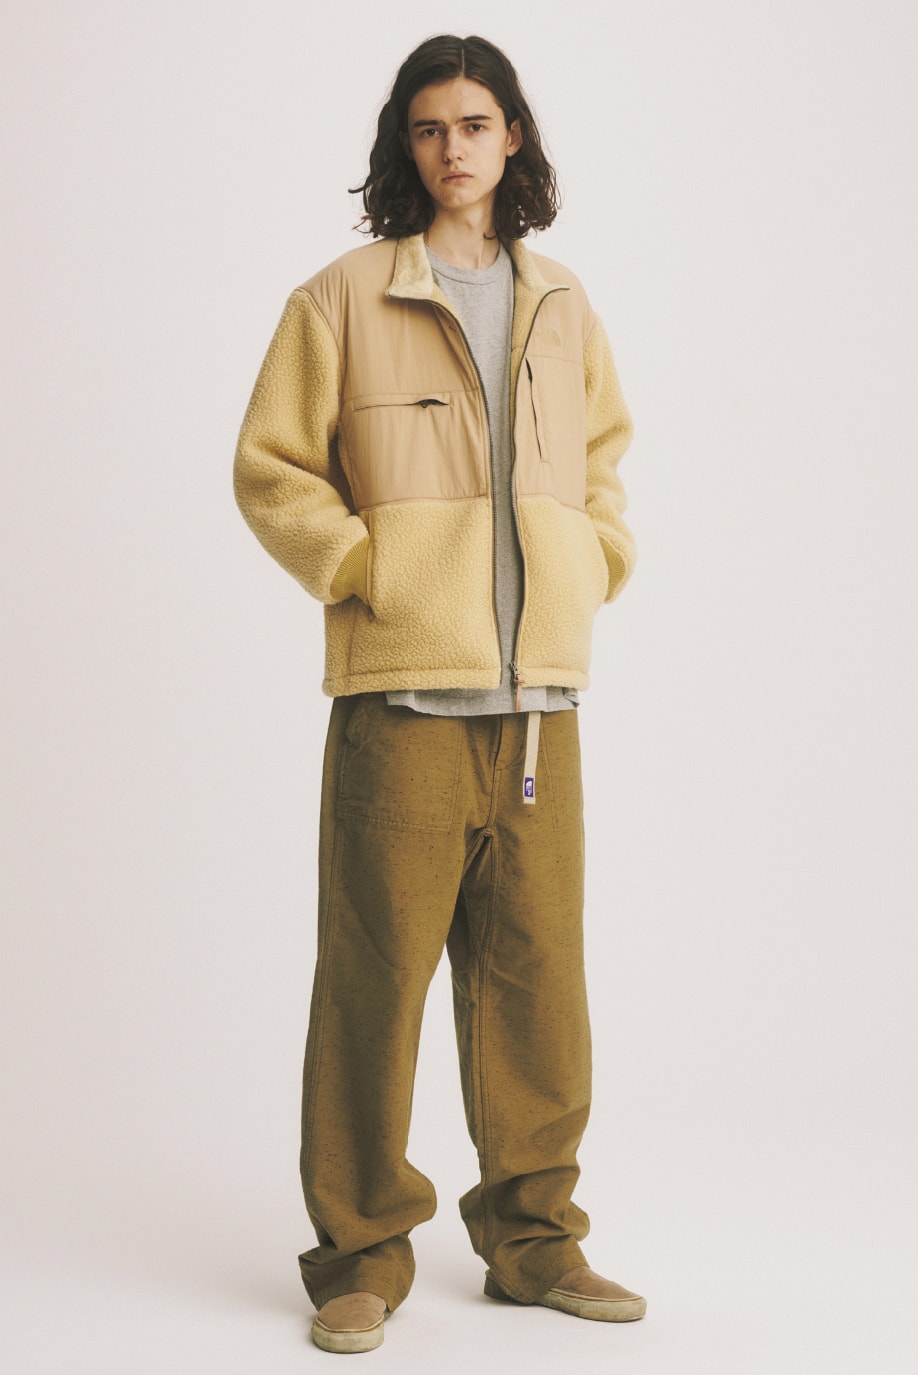 THE NORTH FACE PURPLE LABEL Fall Winter 2018 Lookbook Jackets Outerwear Hoodies Sweaters Pants Trousers Cardigans Scarves Hats Caps